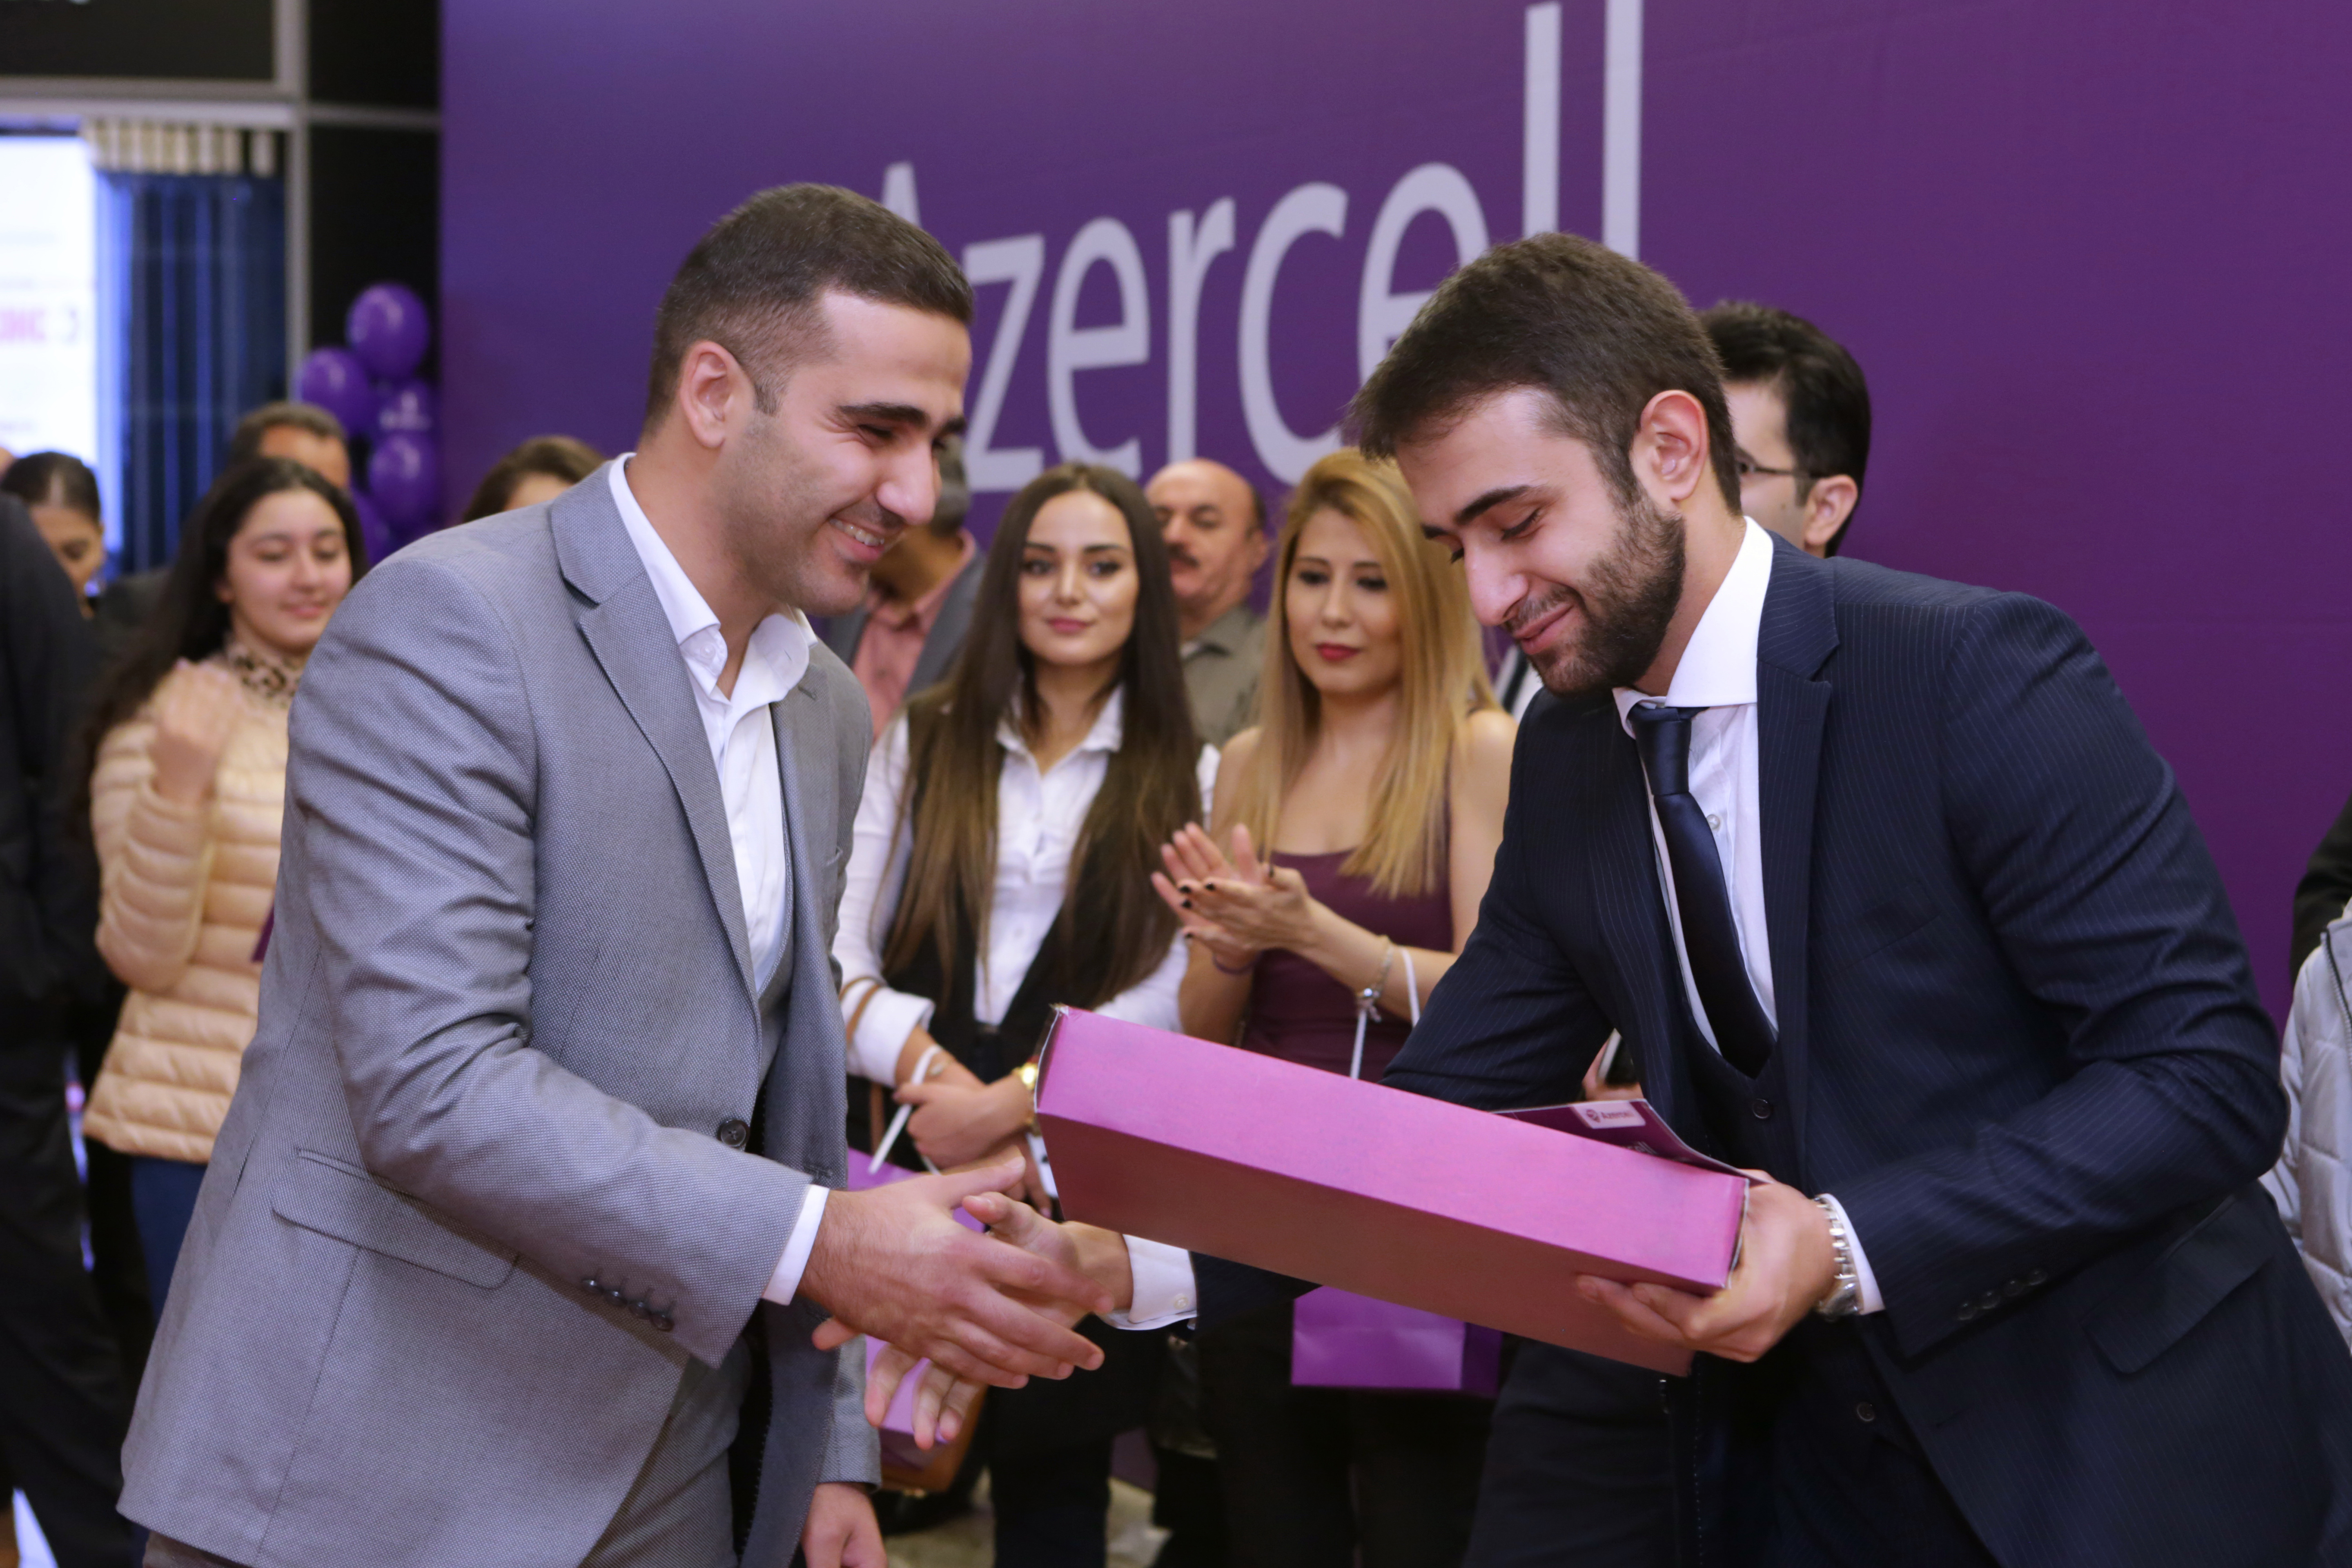 Azercell pioneers first Premium Customer Services in telecom industry